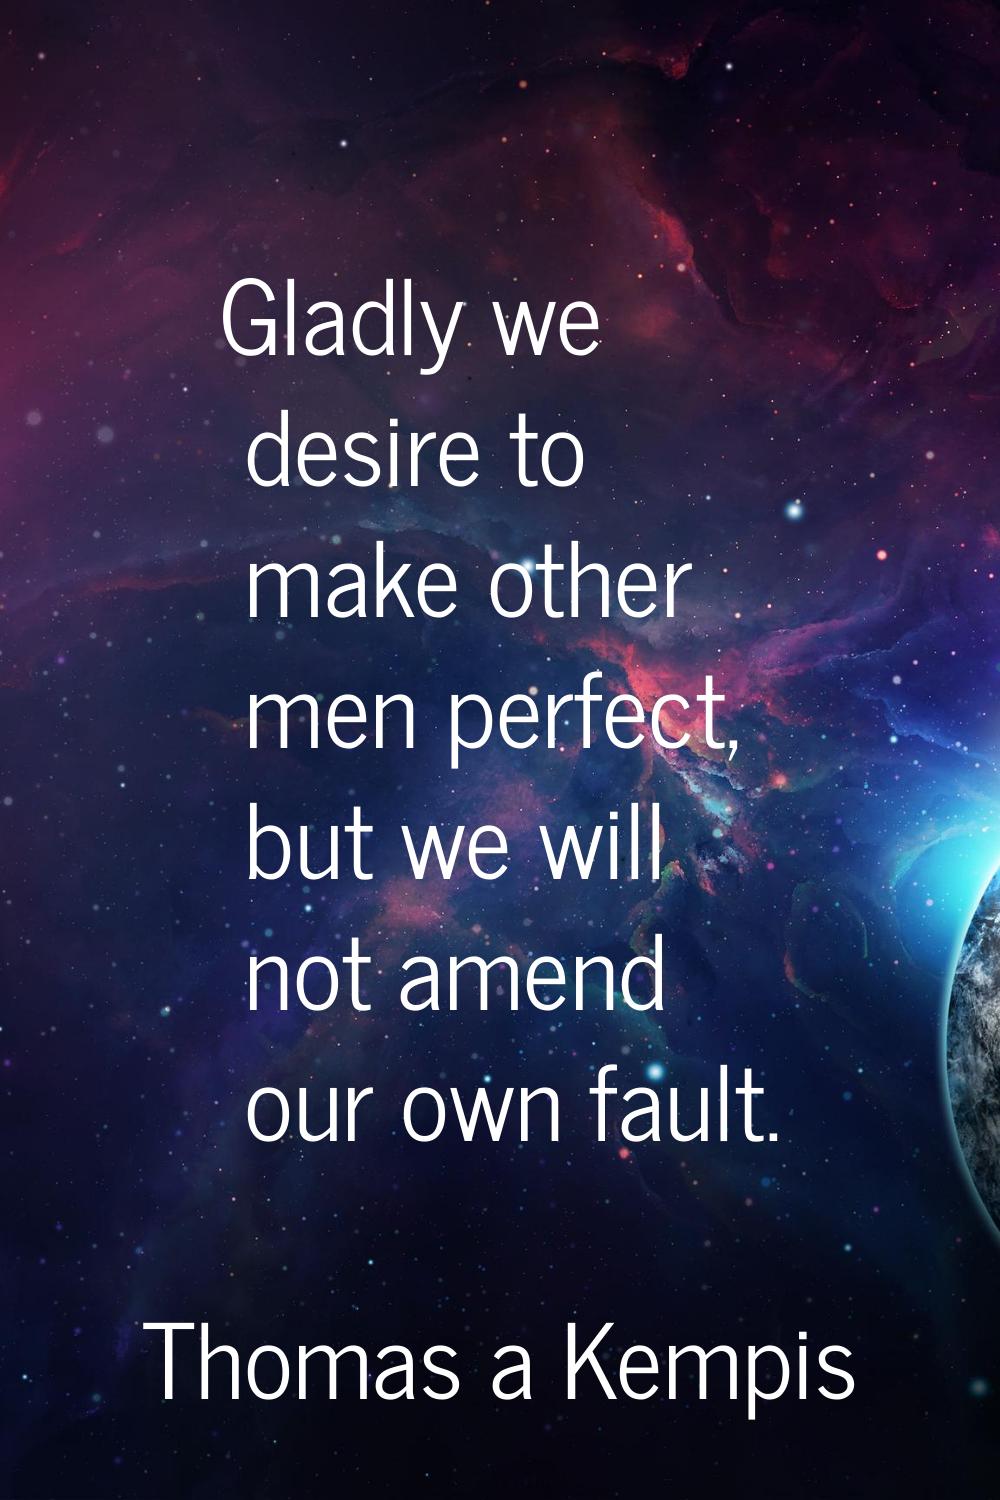 Gladly we desire to make other men perfect, but we will not amend our own fault.